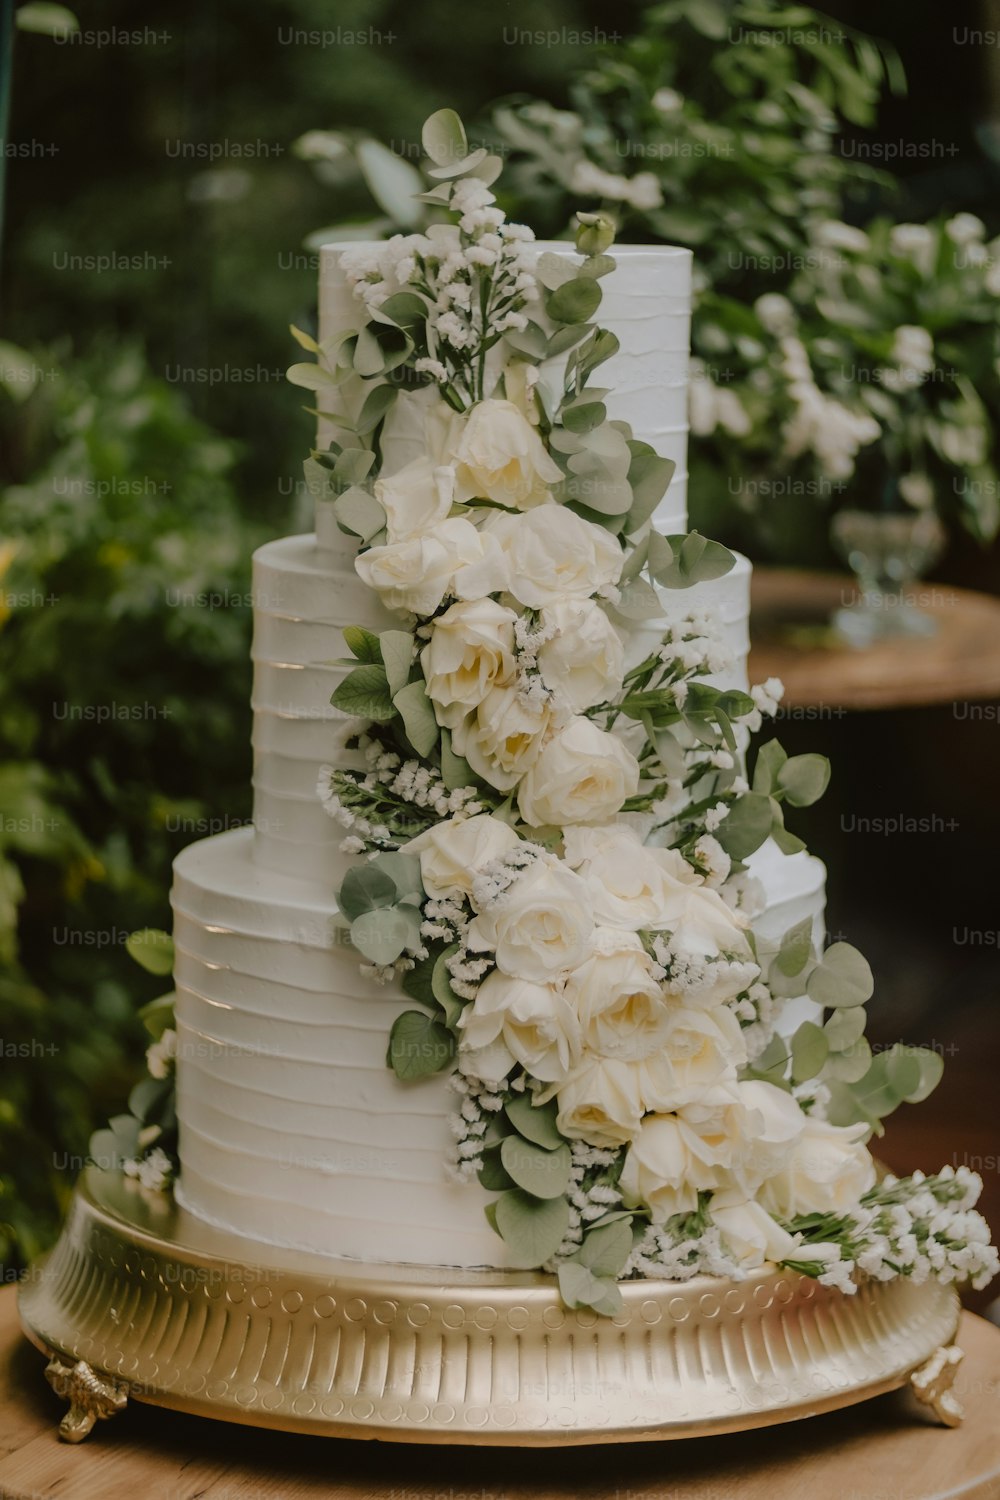 a wedding cake decorated with white flowers and greenery